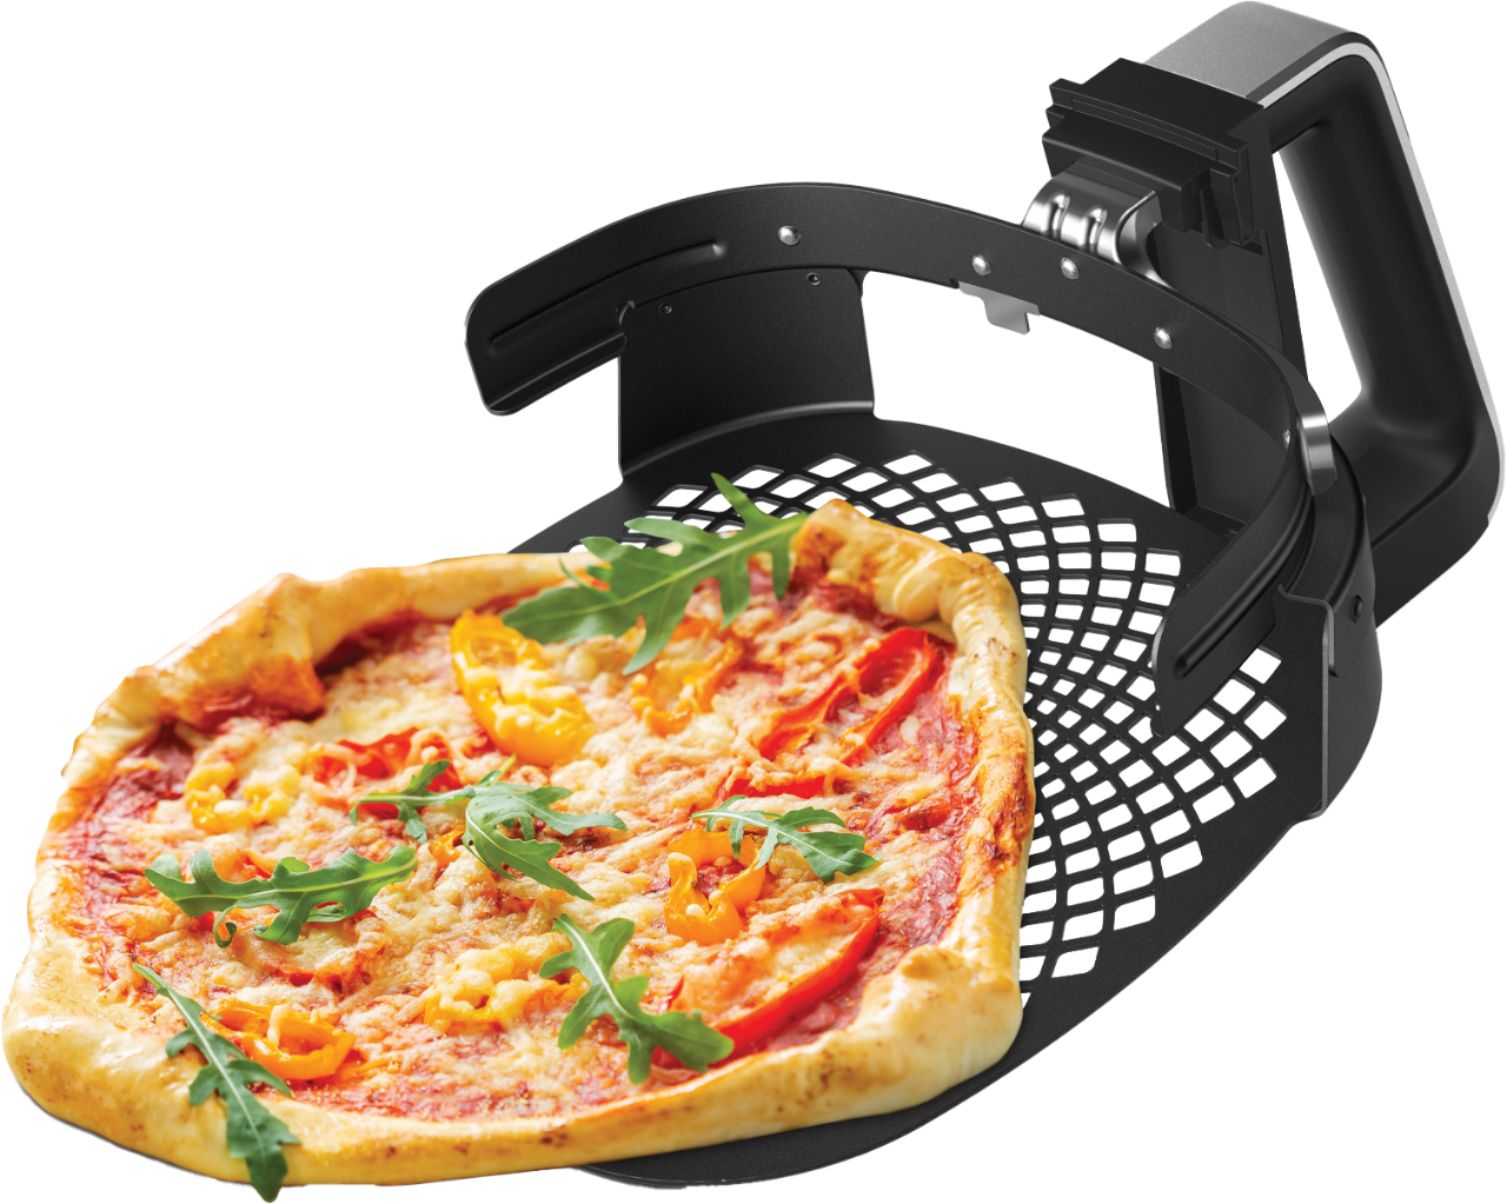 Angle View: Pizza Master Accessory Kit for Philips Airfryer XXL Models - Black